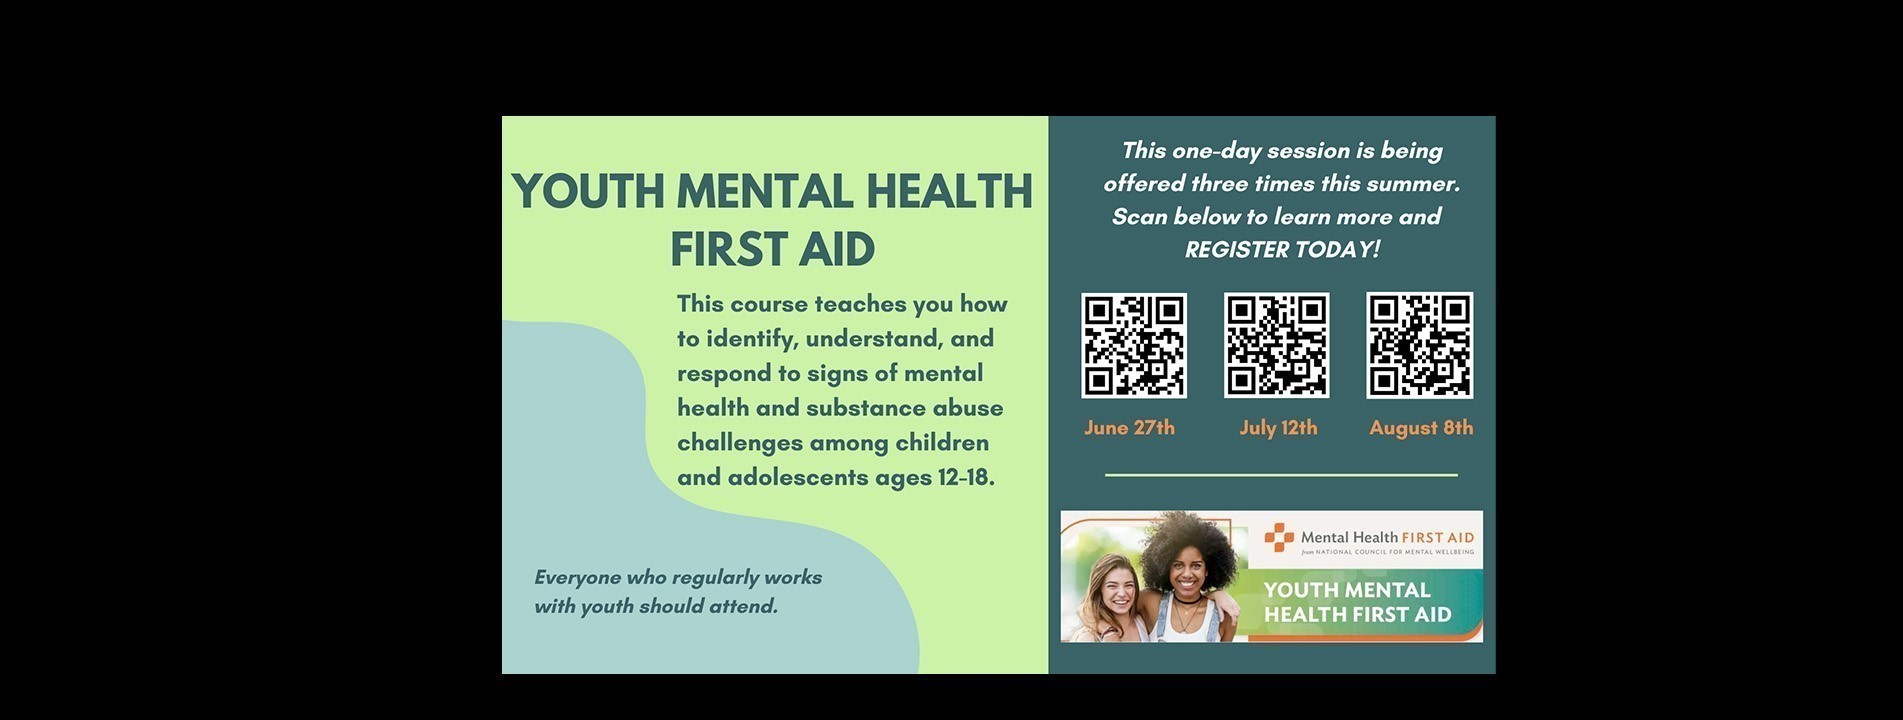 Youth Mental Health First Aid. This course teaches you how to identify, understand, and respond to signs of mental health and substance abuse challenges among children and adolescents ages 12-18. Everyone who regularly works with youth should attend. This one-day session is being offered three times this summer - June 27th, July 12th, and August 8th. Scan QR code to learn more and register today!